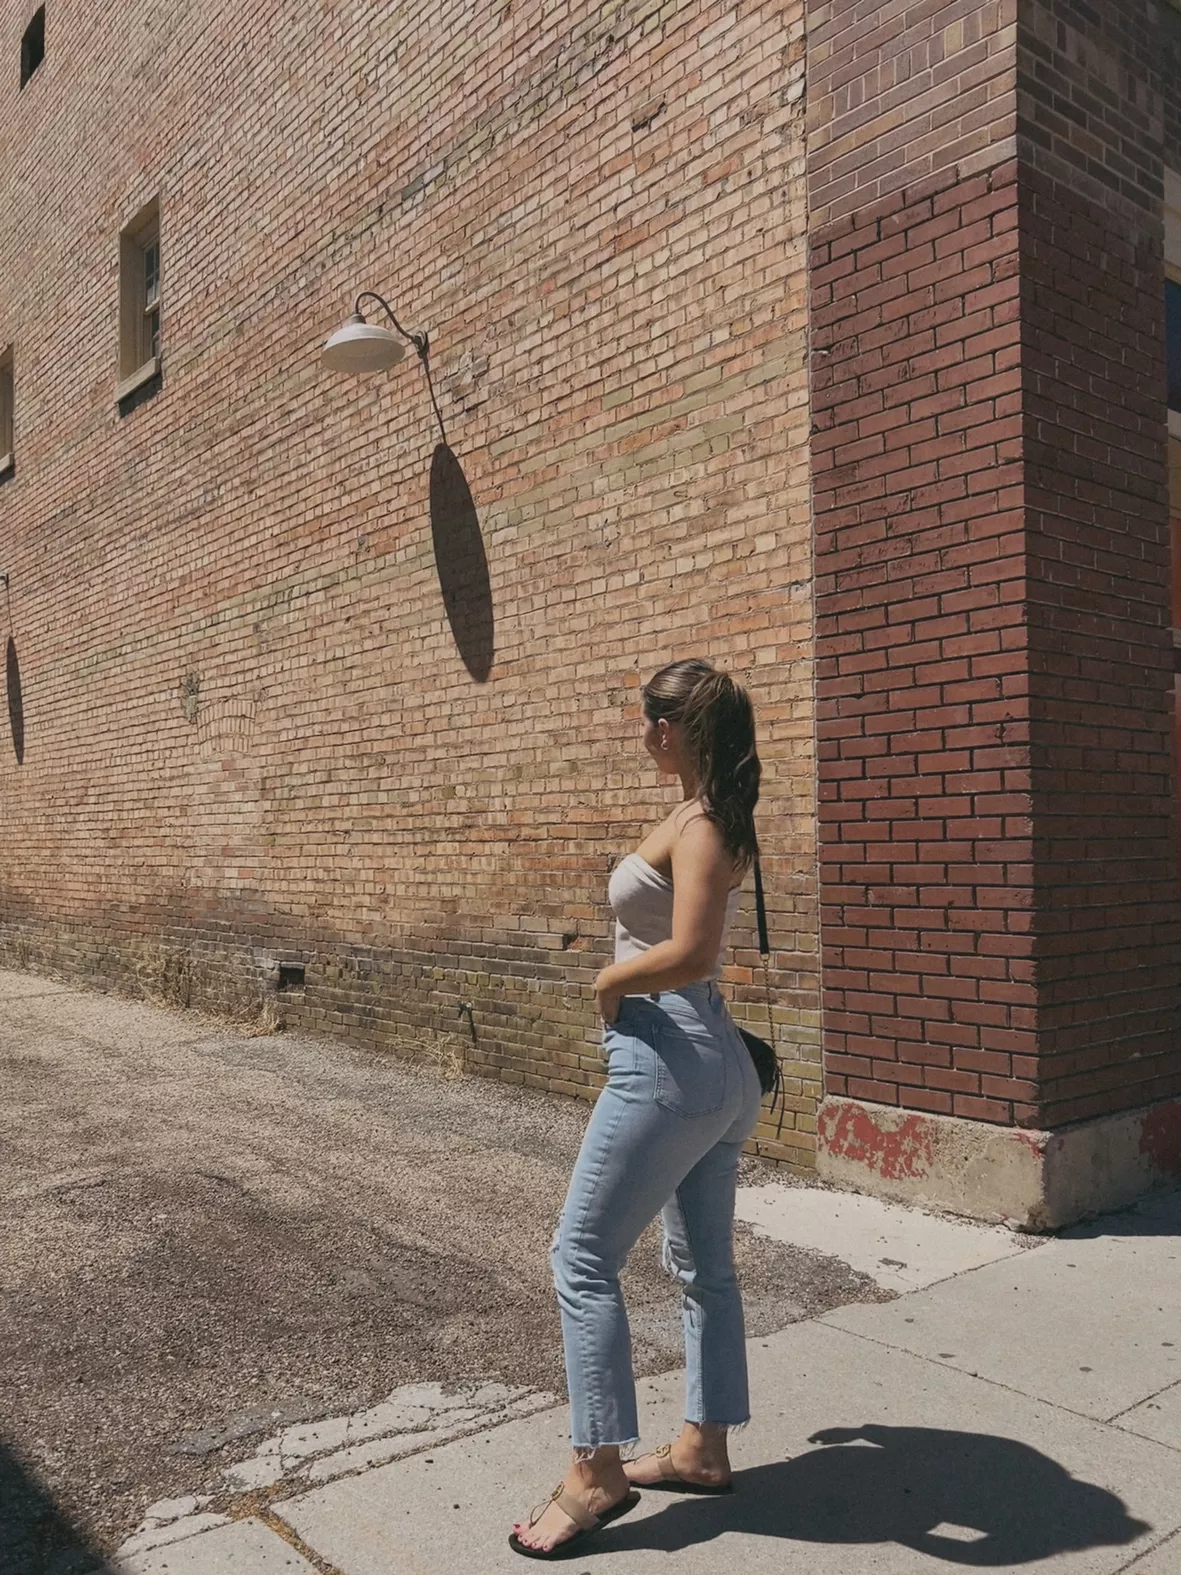 Curvy Super High Waisted Ripped Mom Jeans